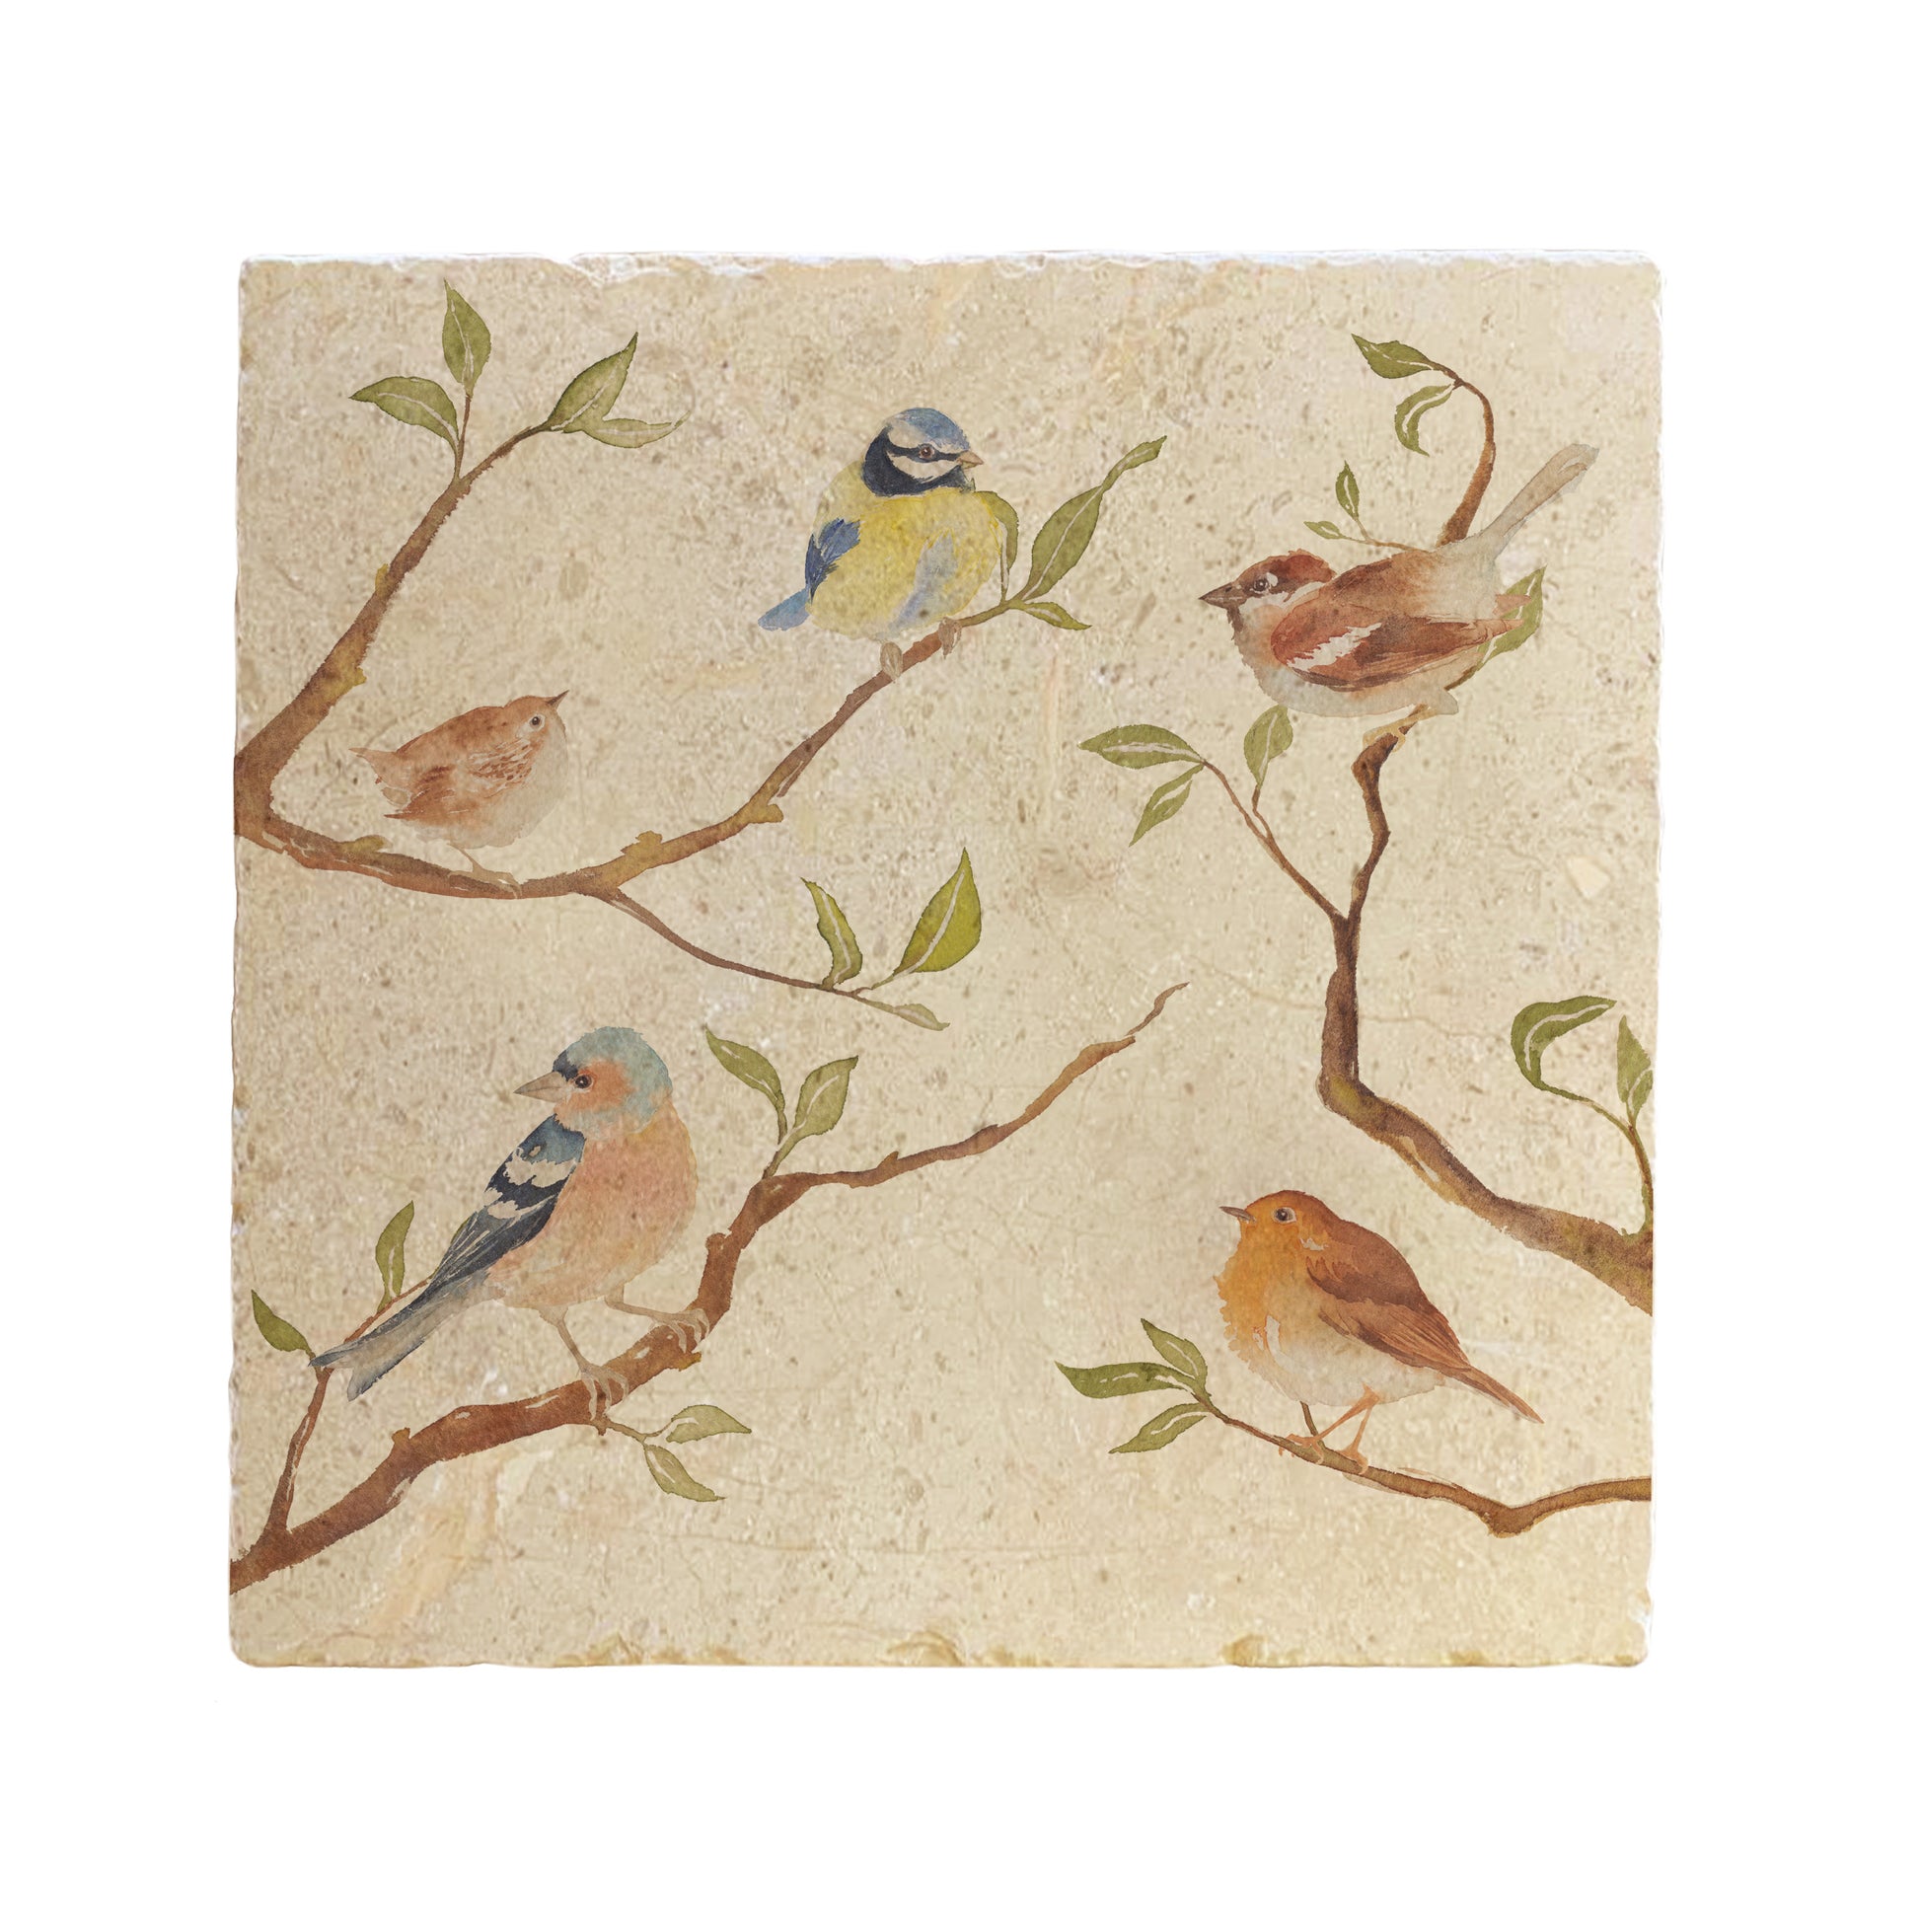 A handmade square cream marble splashback tile featuring a watercolour countryside animal design of British garden birds on branches.